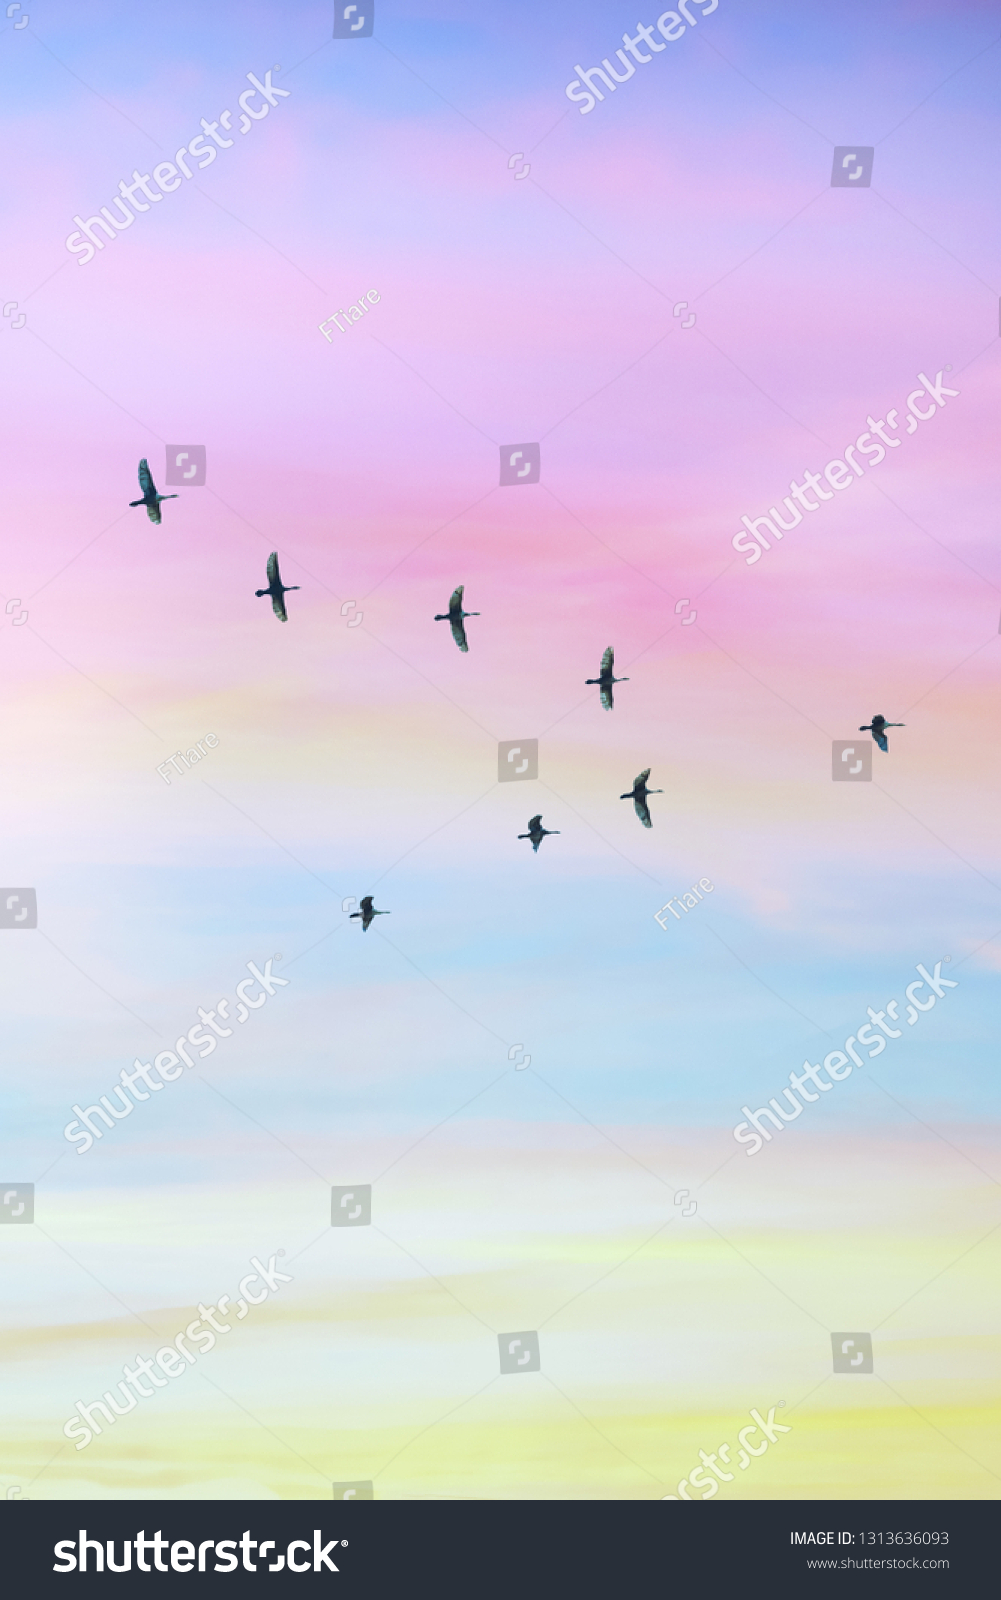 Migratory birds flying in the shape of v on the cloudy sunset sky. Sky and clouds with effect of pastel colored.   #1313636093